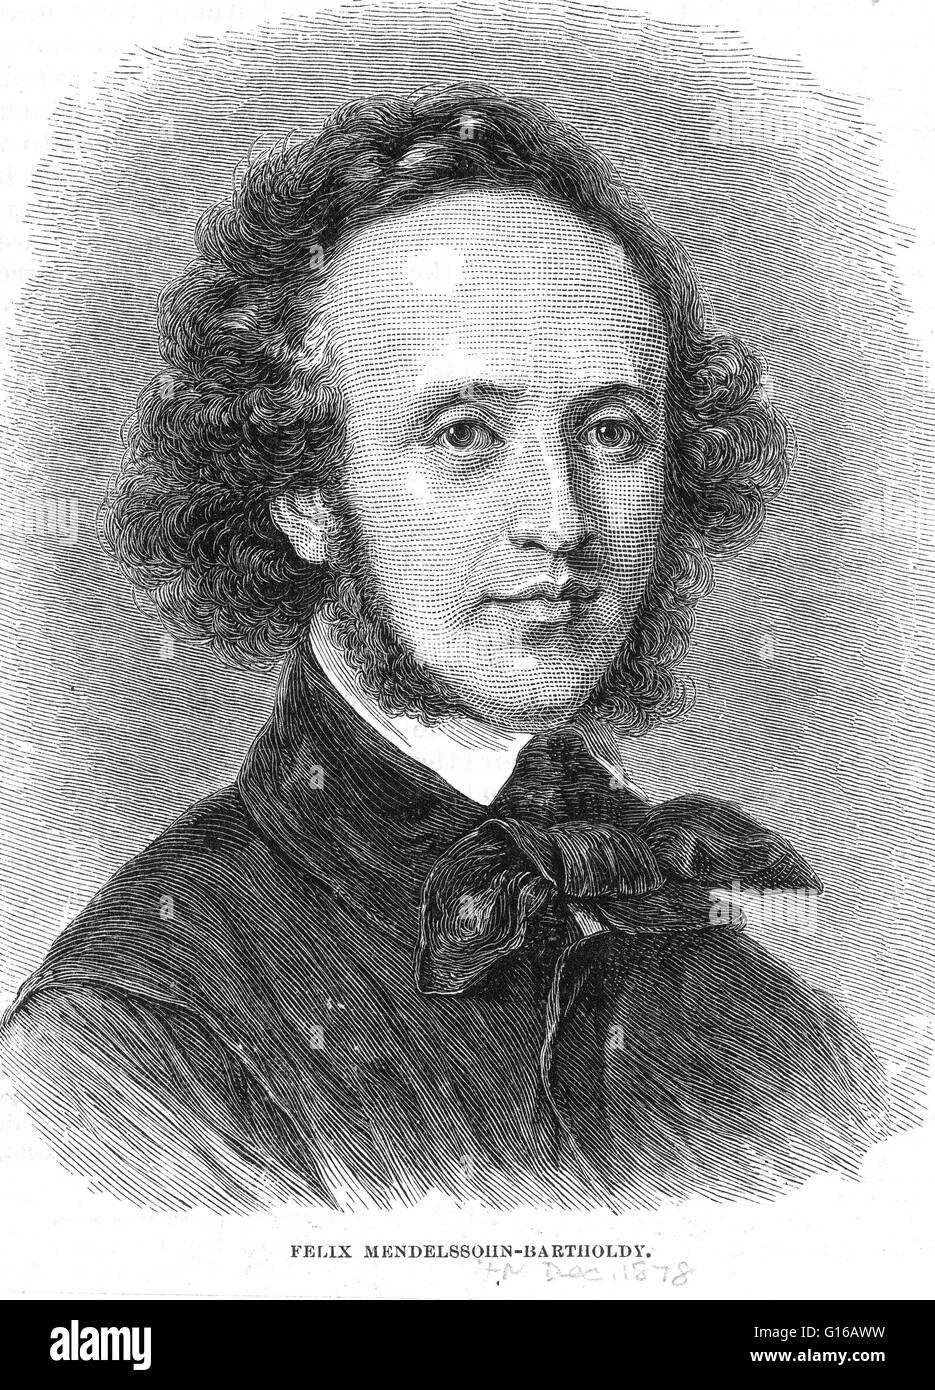 Jakob Ludwig Felix Mendelssohn Bartholdy (February 3, 1809 - November 4, 1847) was a German composer, pianist, organist and conductor of the early Romantic period. A grandson of the philosopher Moses Mendelssohn. He was a musical prodigy. In 1821 he was i Stock Photo